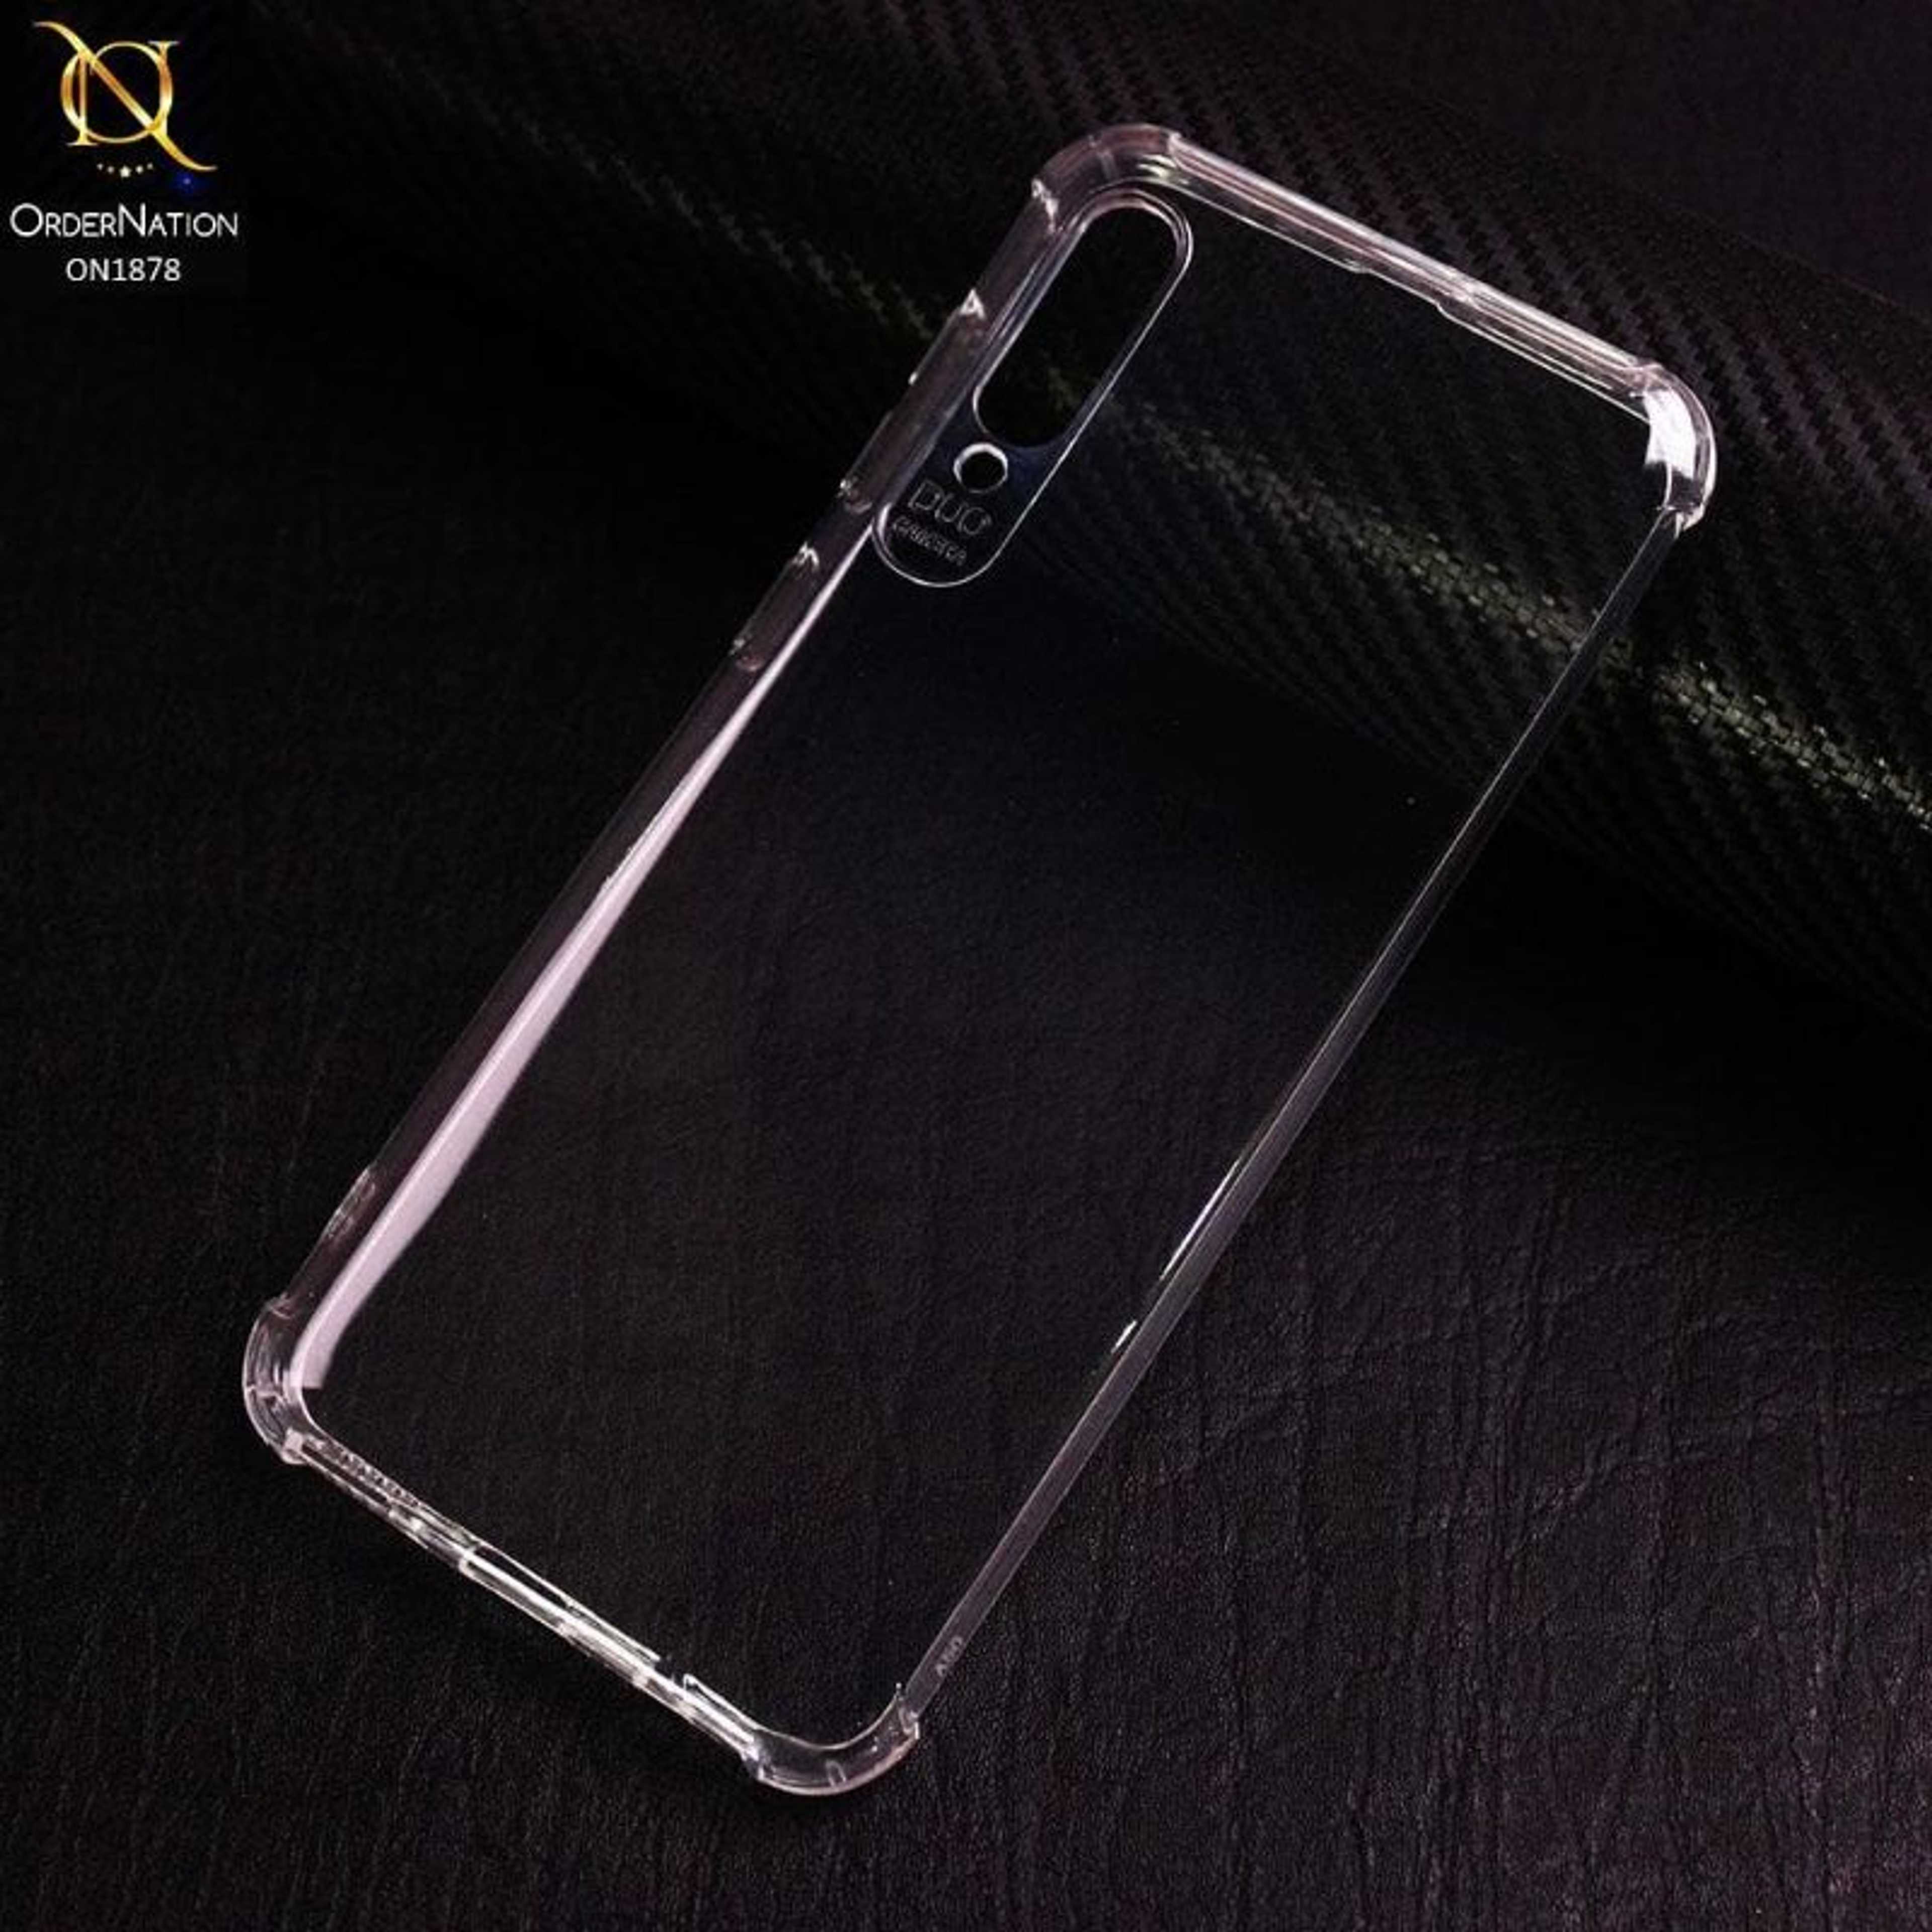 Samsung Galaxy A50 Cover - Soft 6D Design Shockproof Silicone Transparent Clear Case